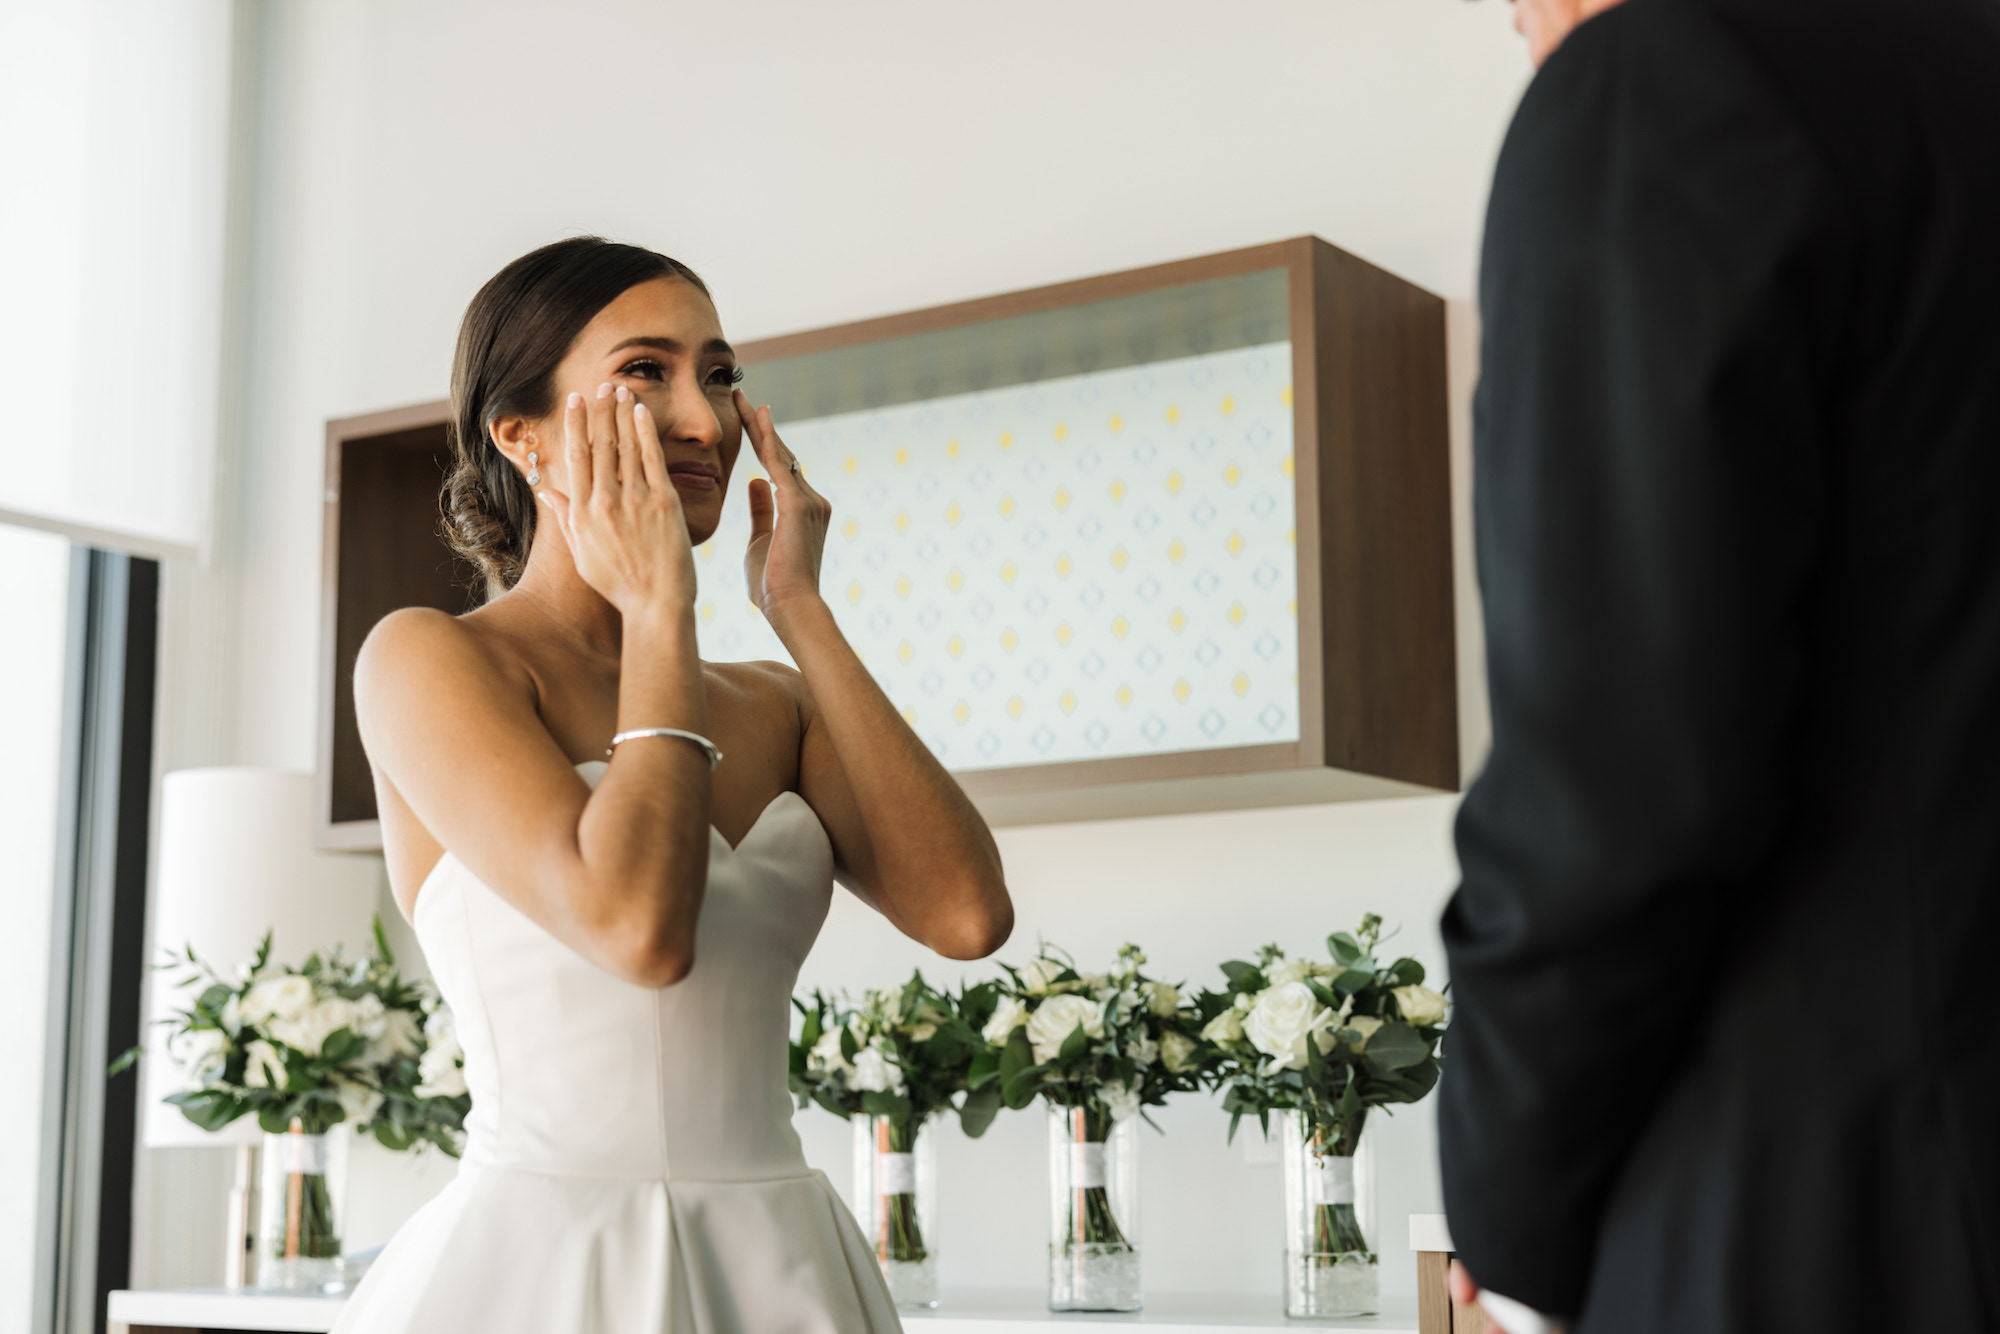 Classic Emotional Bride First Look with Father | Tampa Bay Wedding Hair and Makeup Femme Akoi Beauty Studio